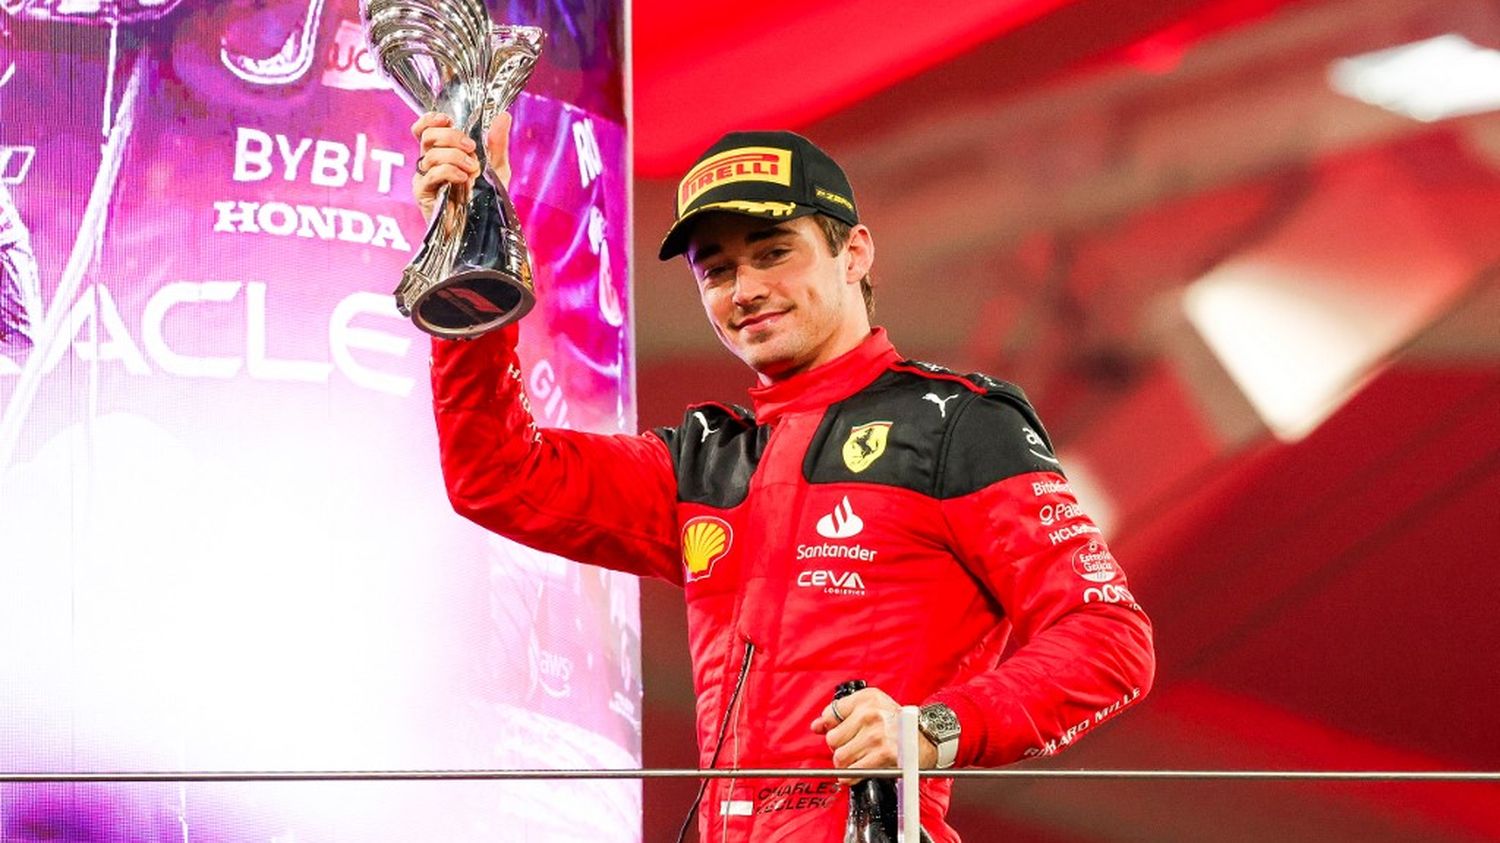 Formula 1: Charles Leclerc extends his contract with Ferrari "beyond the 2024 season"